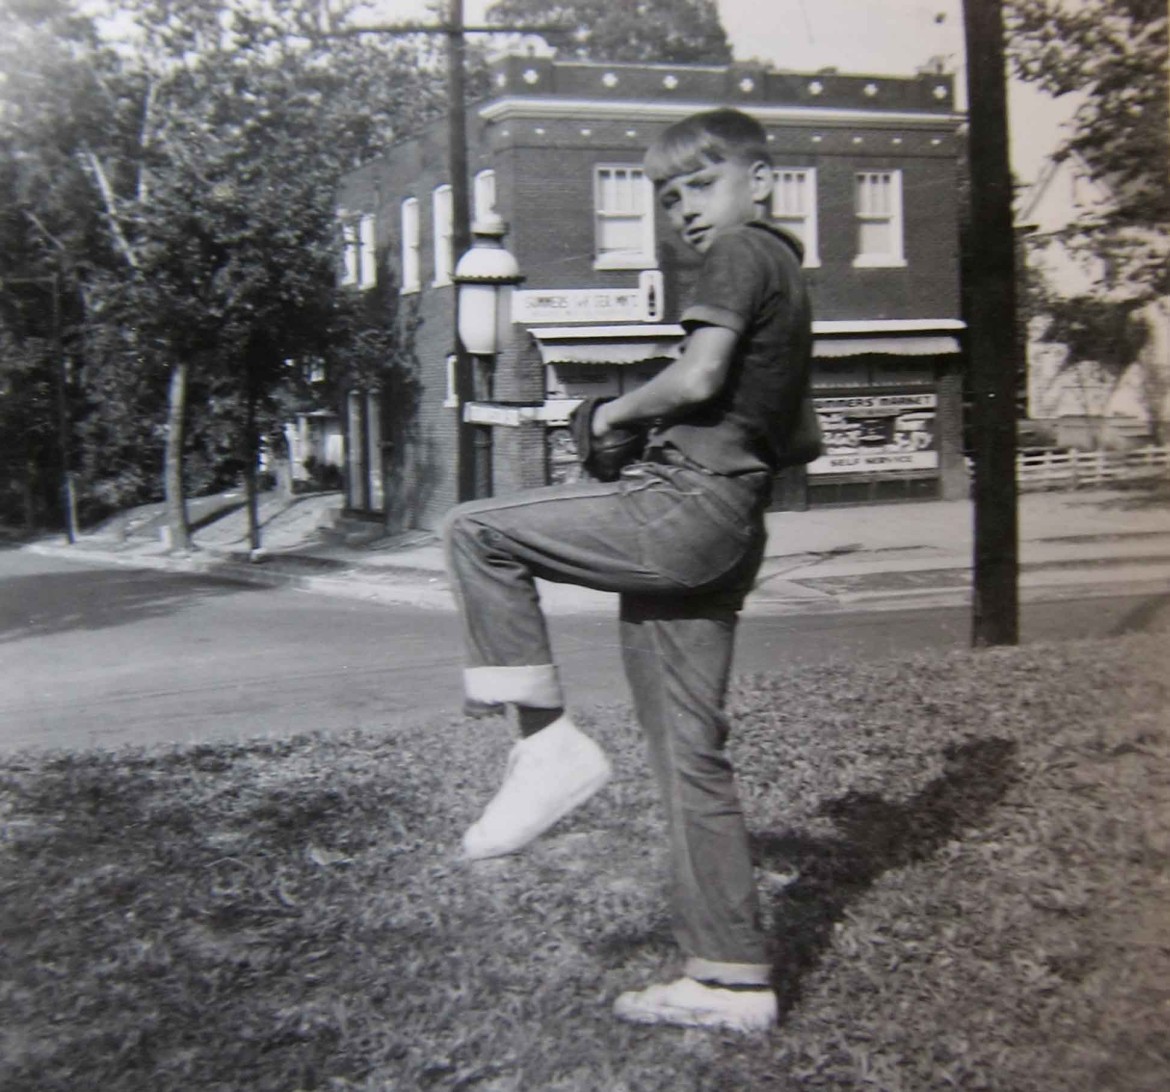 Let's start with this photo because it has a good view of the building. The young man, probably a neighbor, is Chester Rose and the year is 1955.